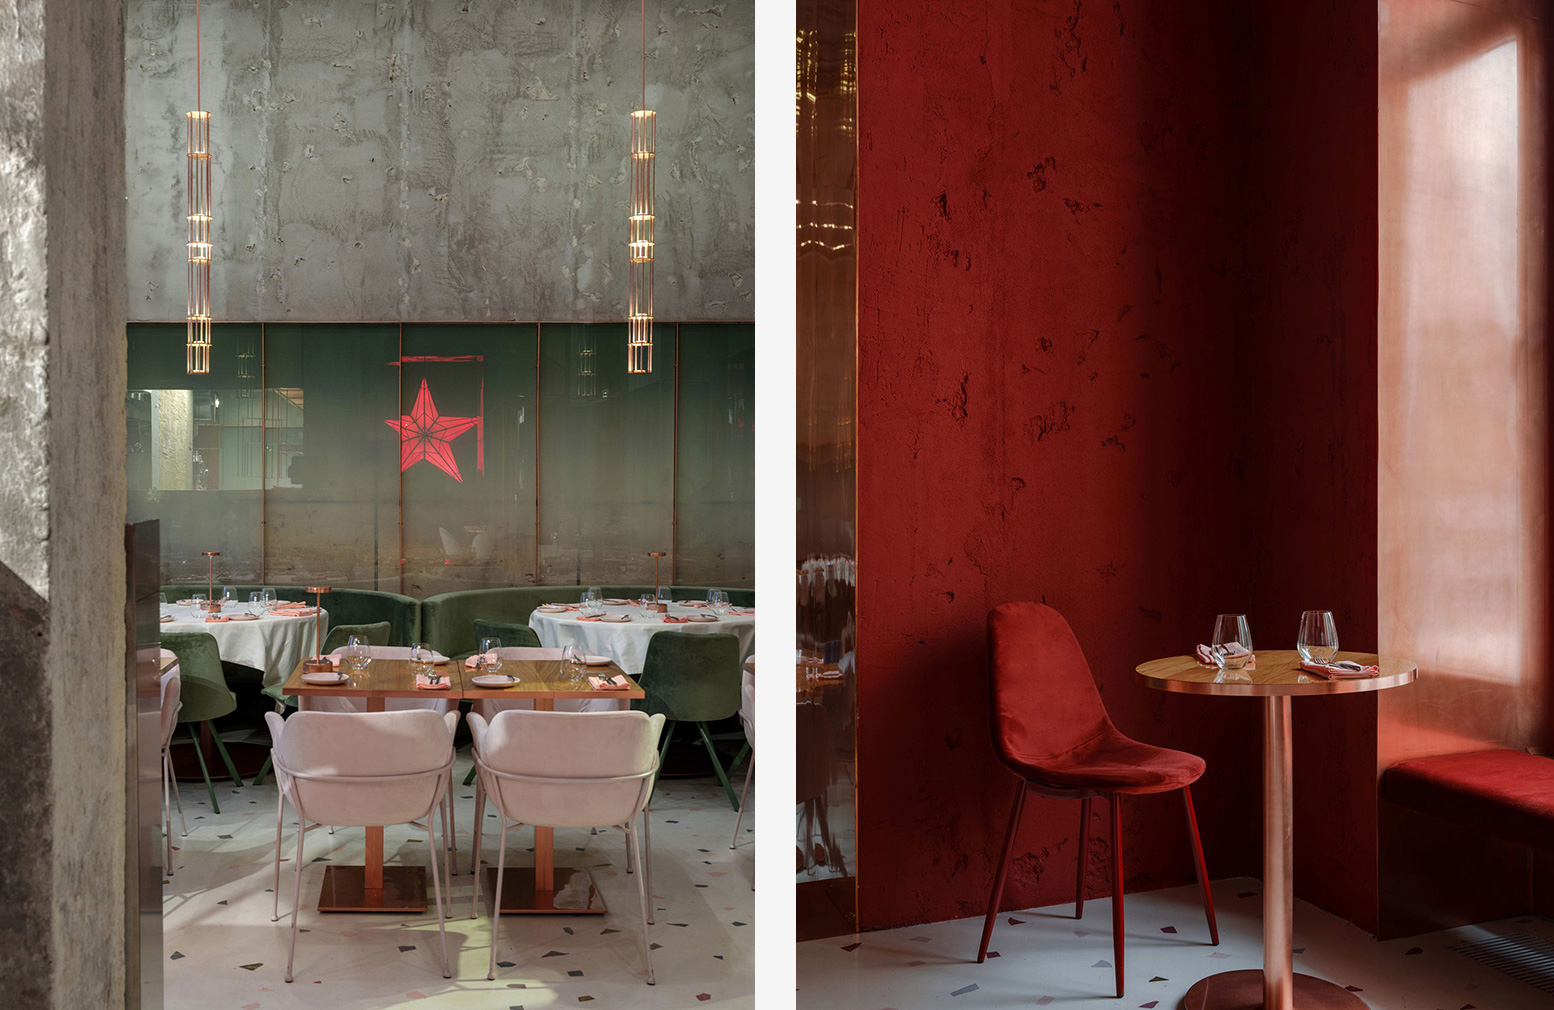 Pastel and concrete reigns supreme at Moscow’s Pink Mama restaurant